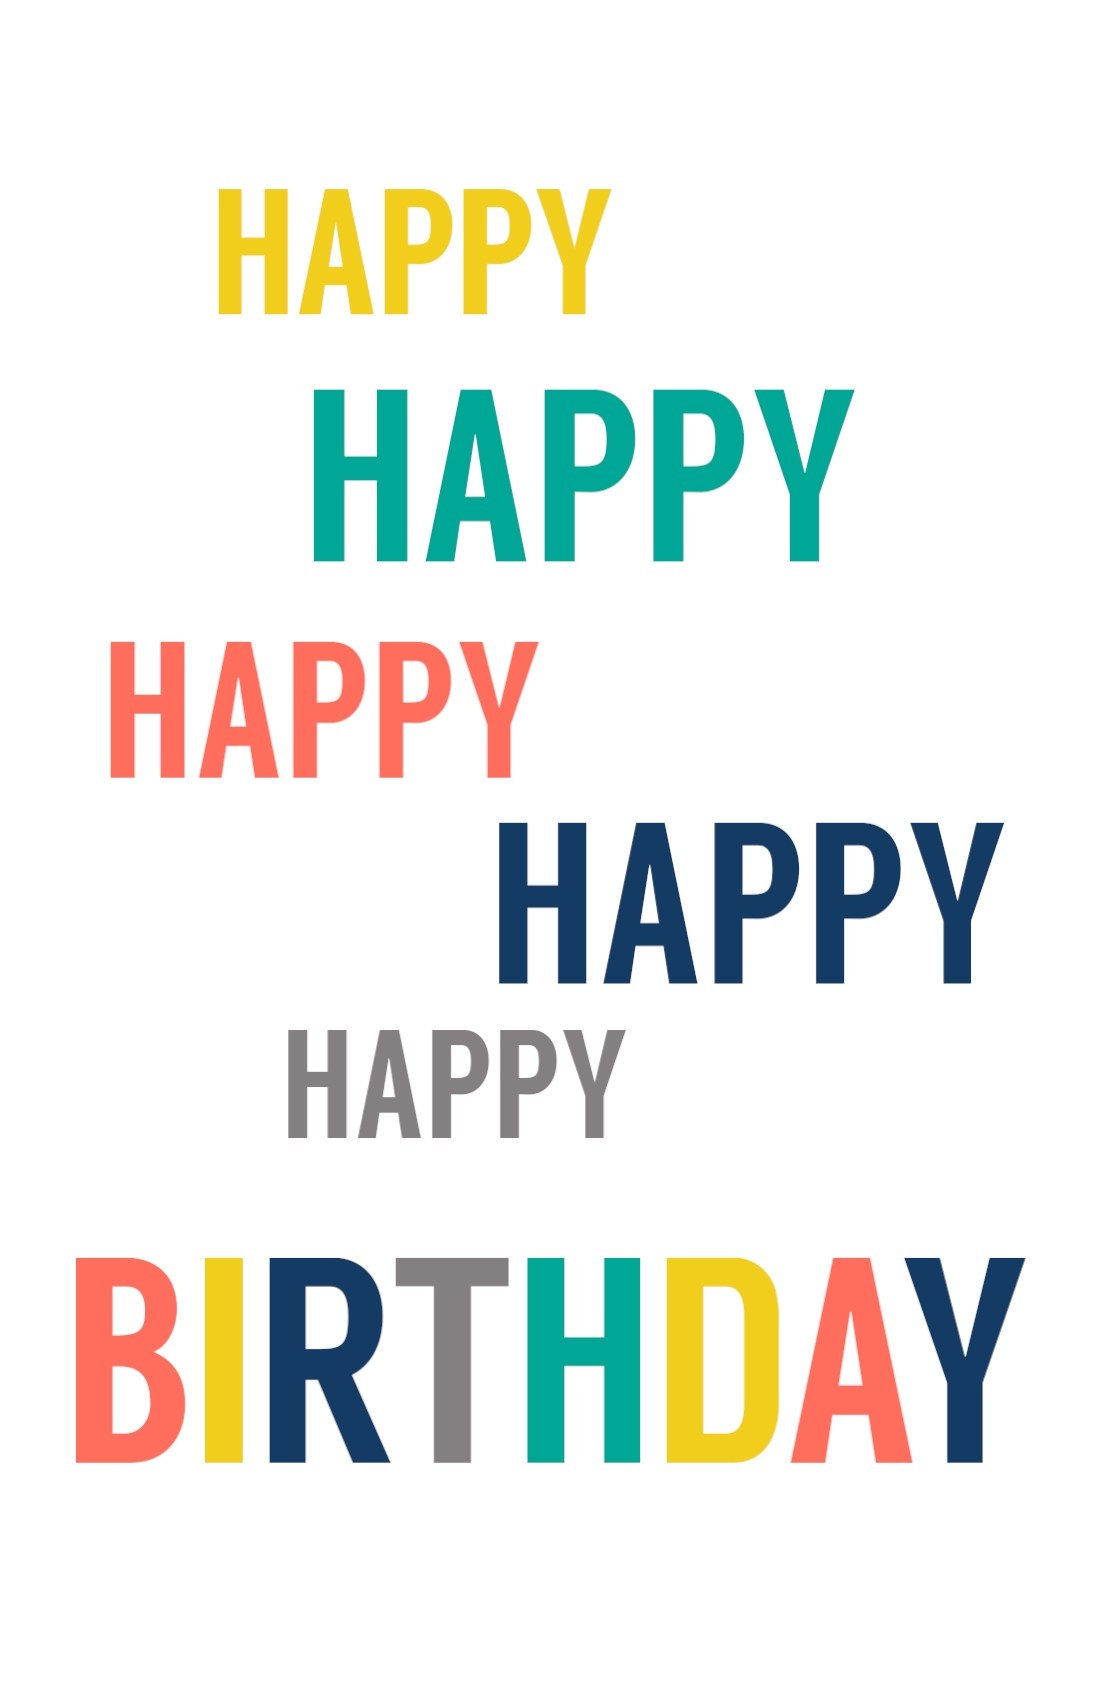 Free Printable Birthday Cards - Paper Trail Design - Free Printable Birthday Cards